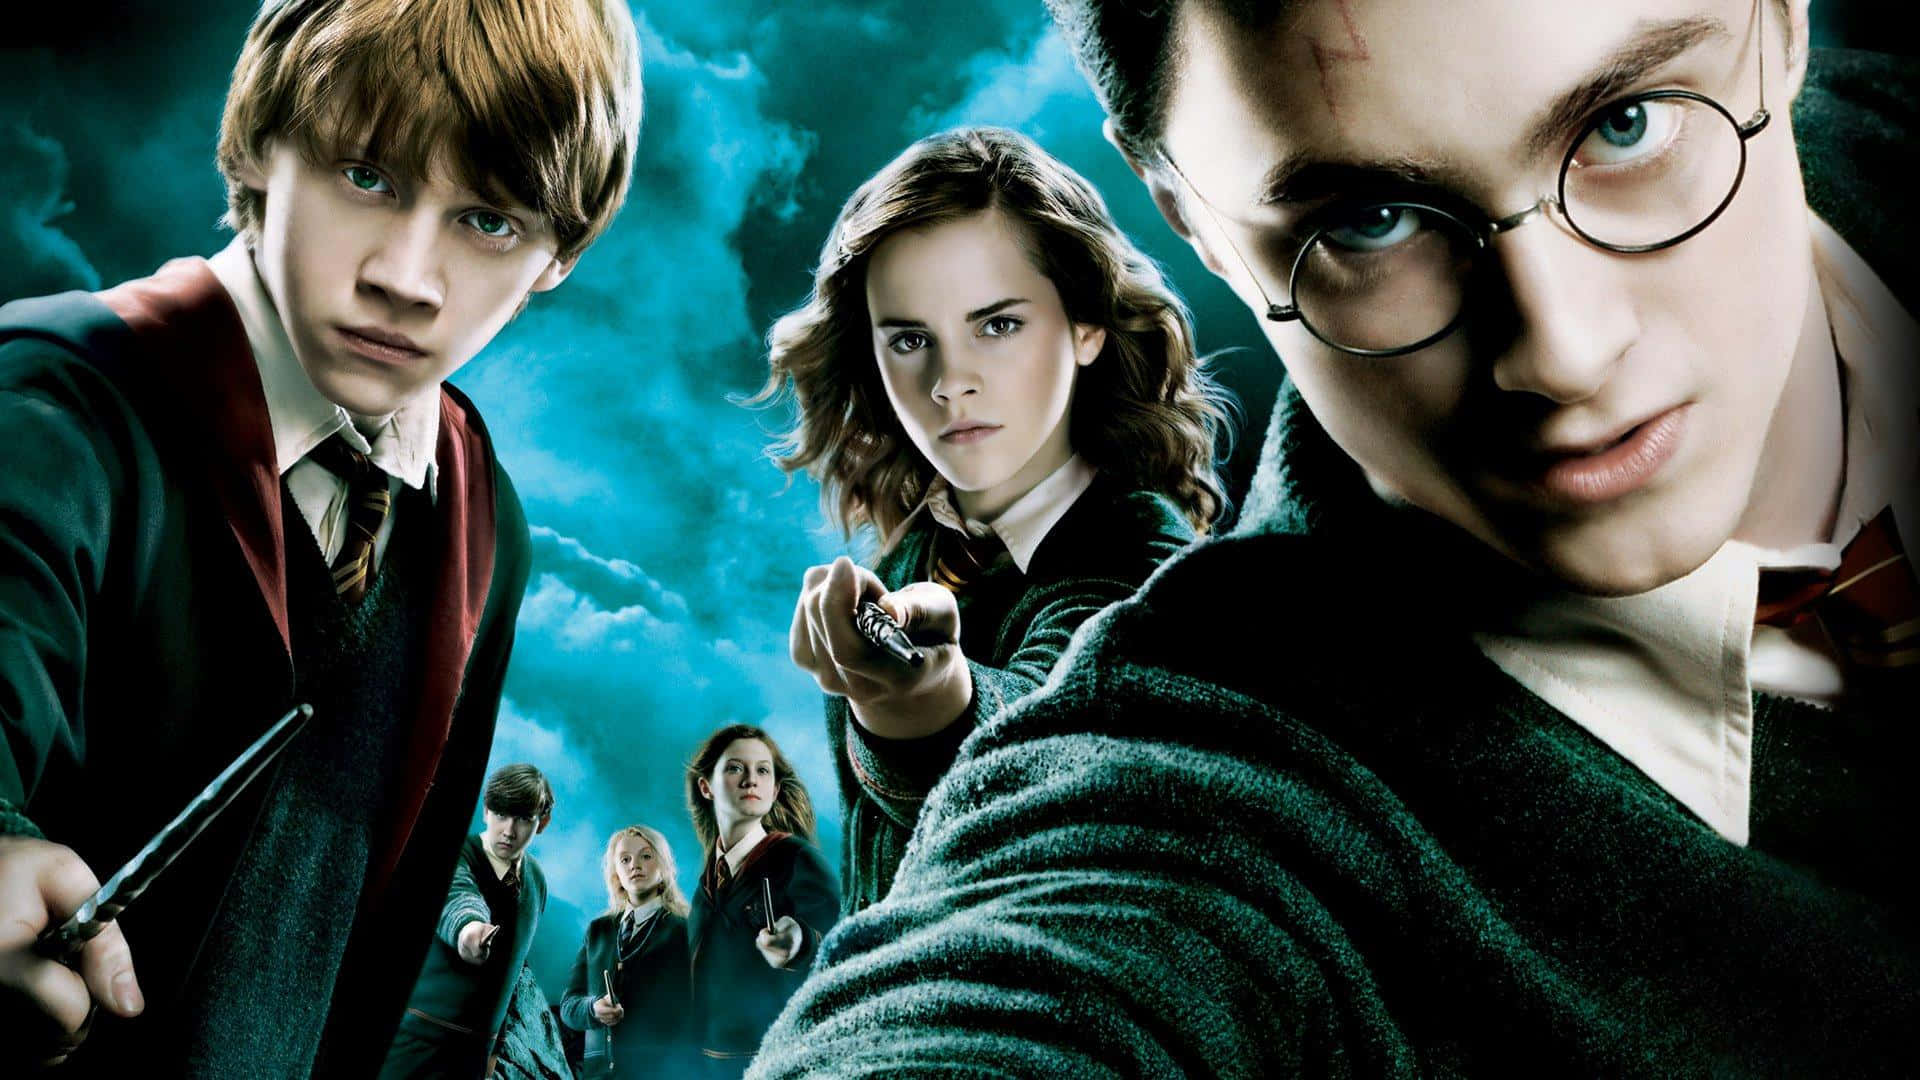 Loyal Friends&Magic Wands - All Your Favorite Harry Potter Characters in One Photo Wallpaper